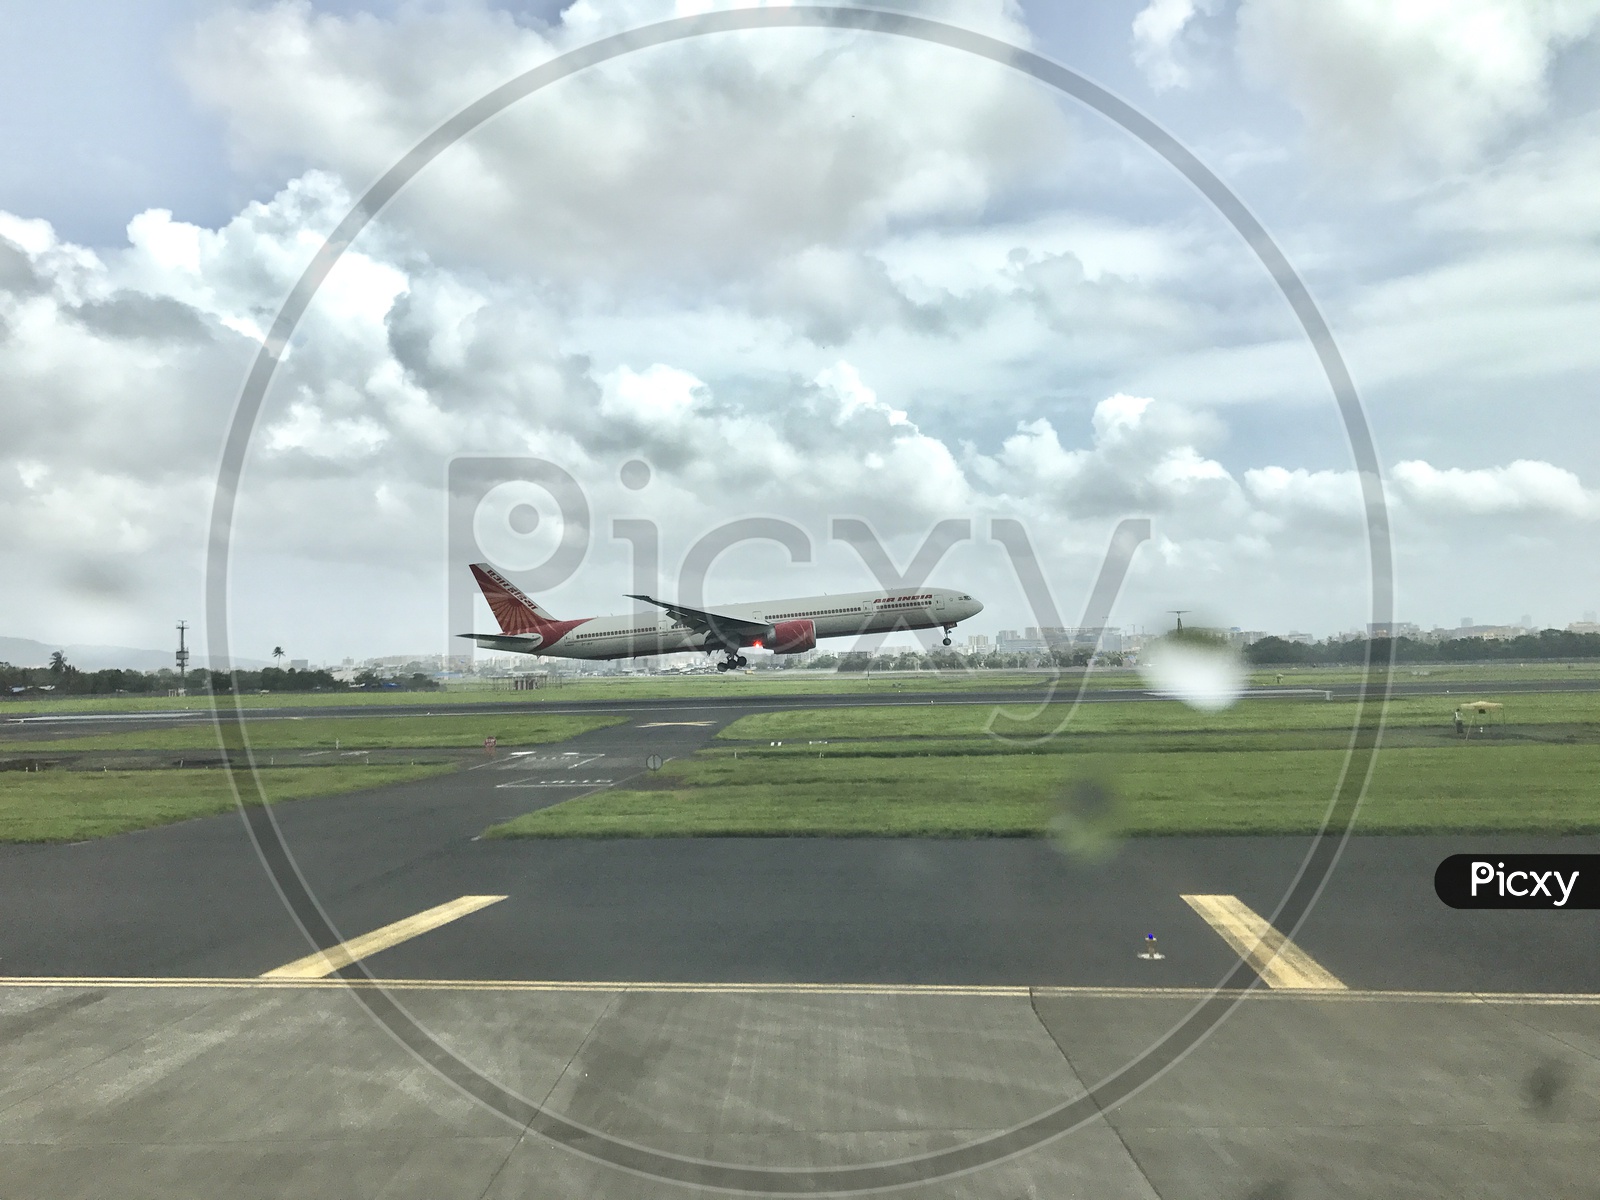 Air India Flight taking off from Runway